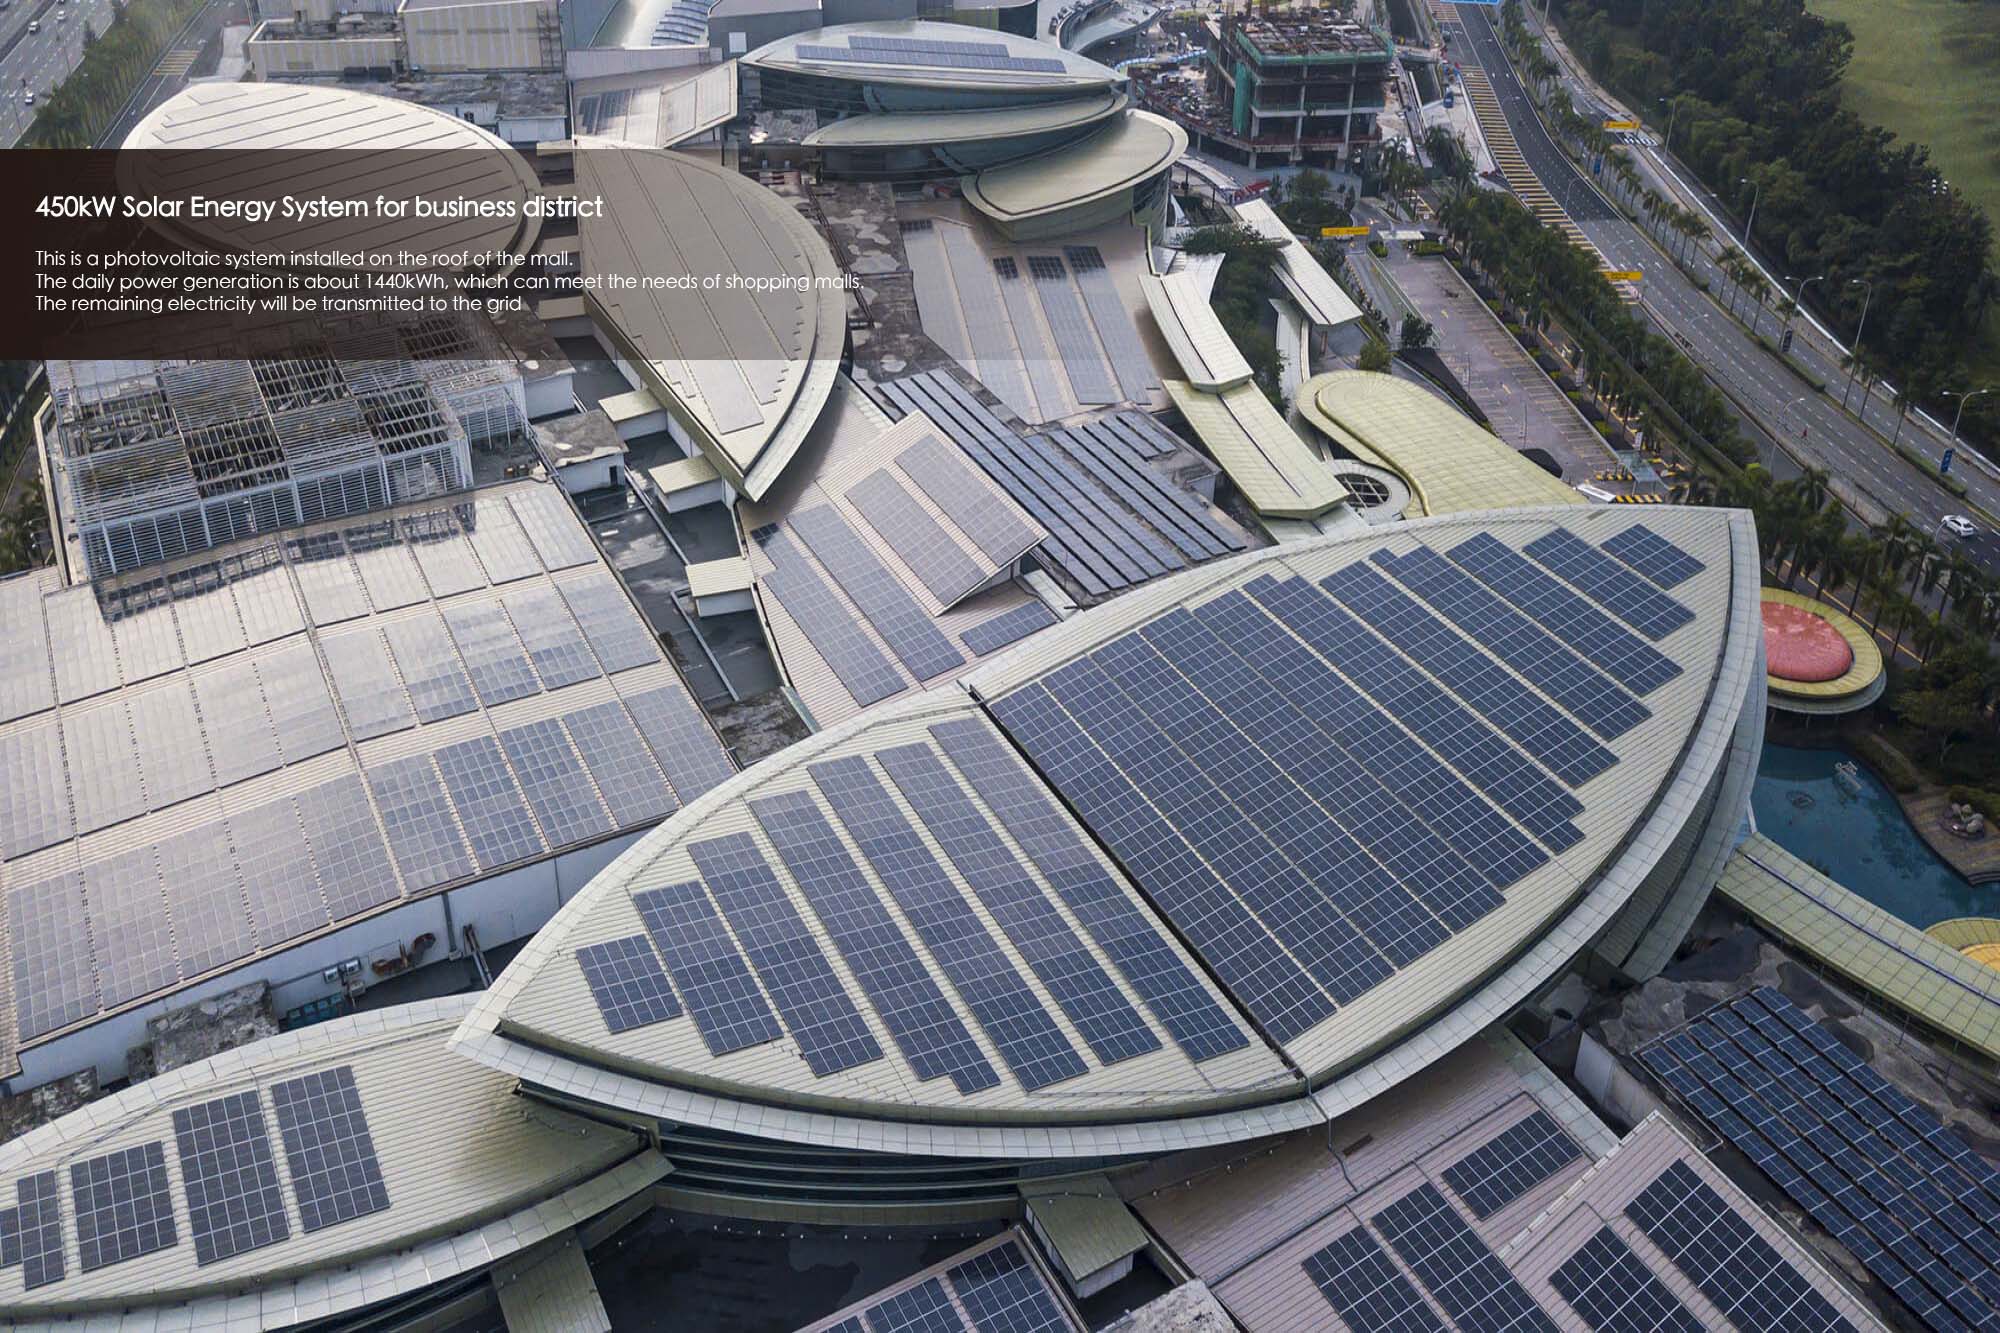 450kW Solar Energy System for business district